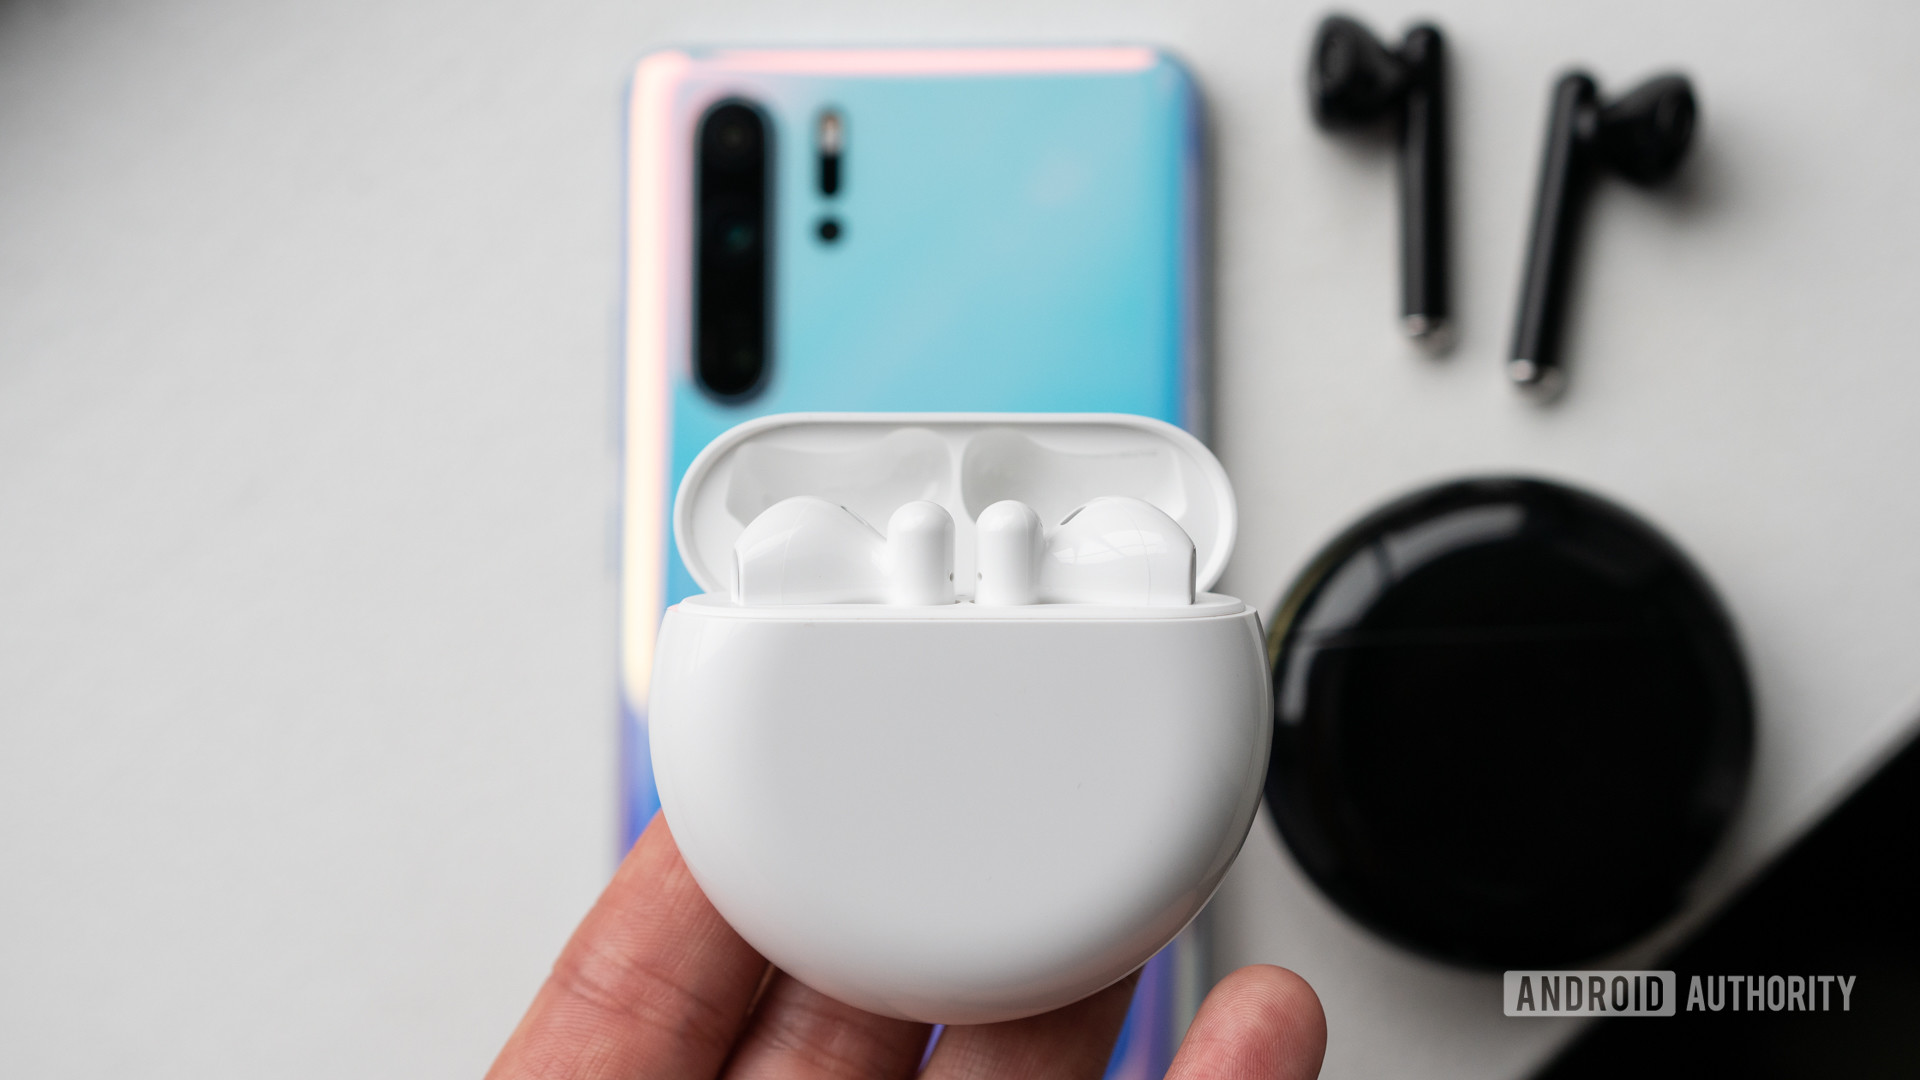 White Huawei Freebuds 3 in its charging case pictured alongside P30 Pro and the black color